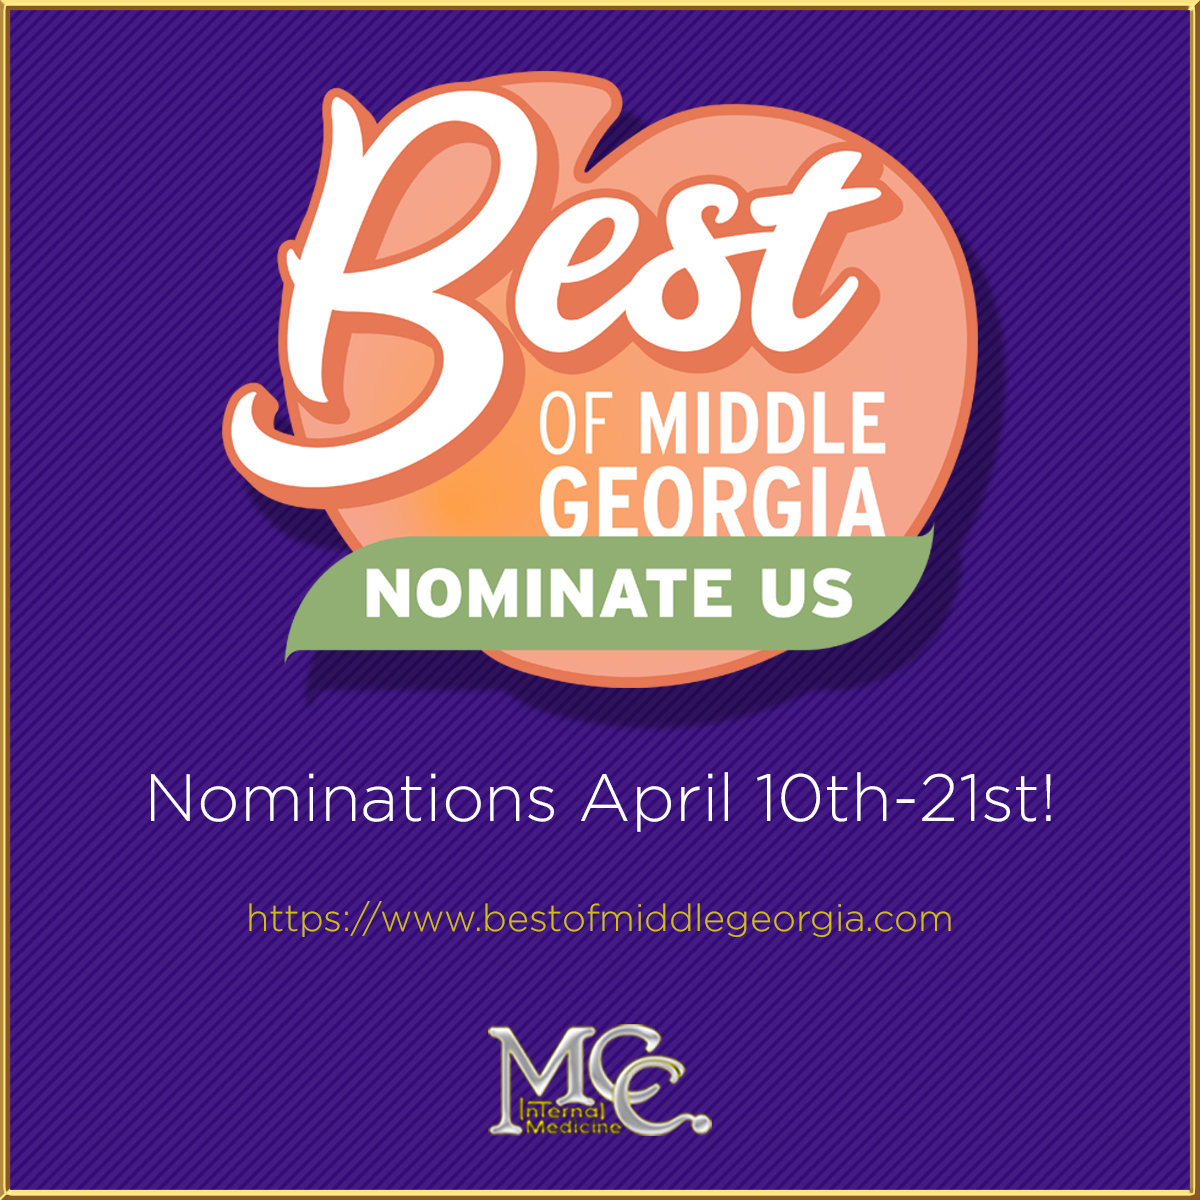 Nominations for the Best of Middle Georgia begin today AT NOON!

•Go to bestofmiddlegeorgia.com .
•Navigate and vote for Dr. McClure in the Doctor category.
•Navigate and vote for MCC in the Family Medicine category.

Thanks so much!

#BestofMiddleGeorgia